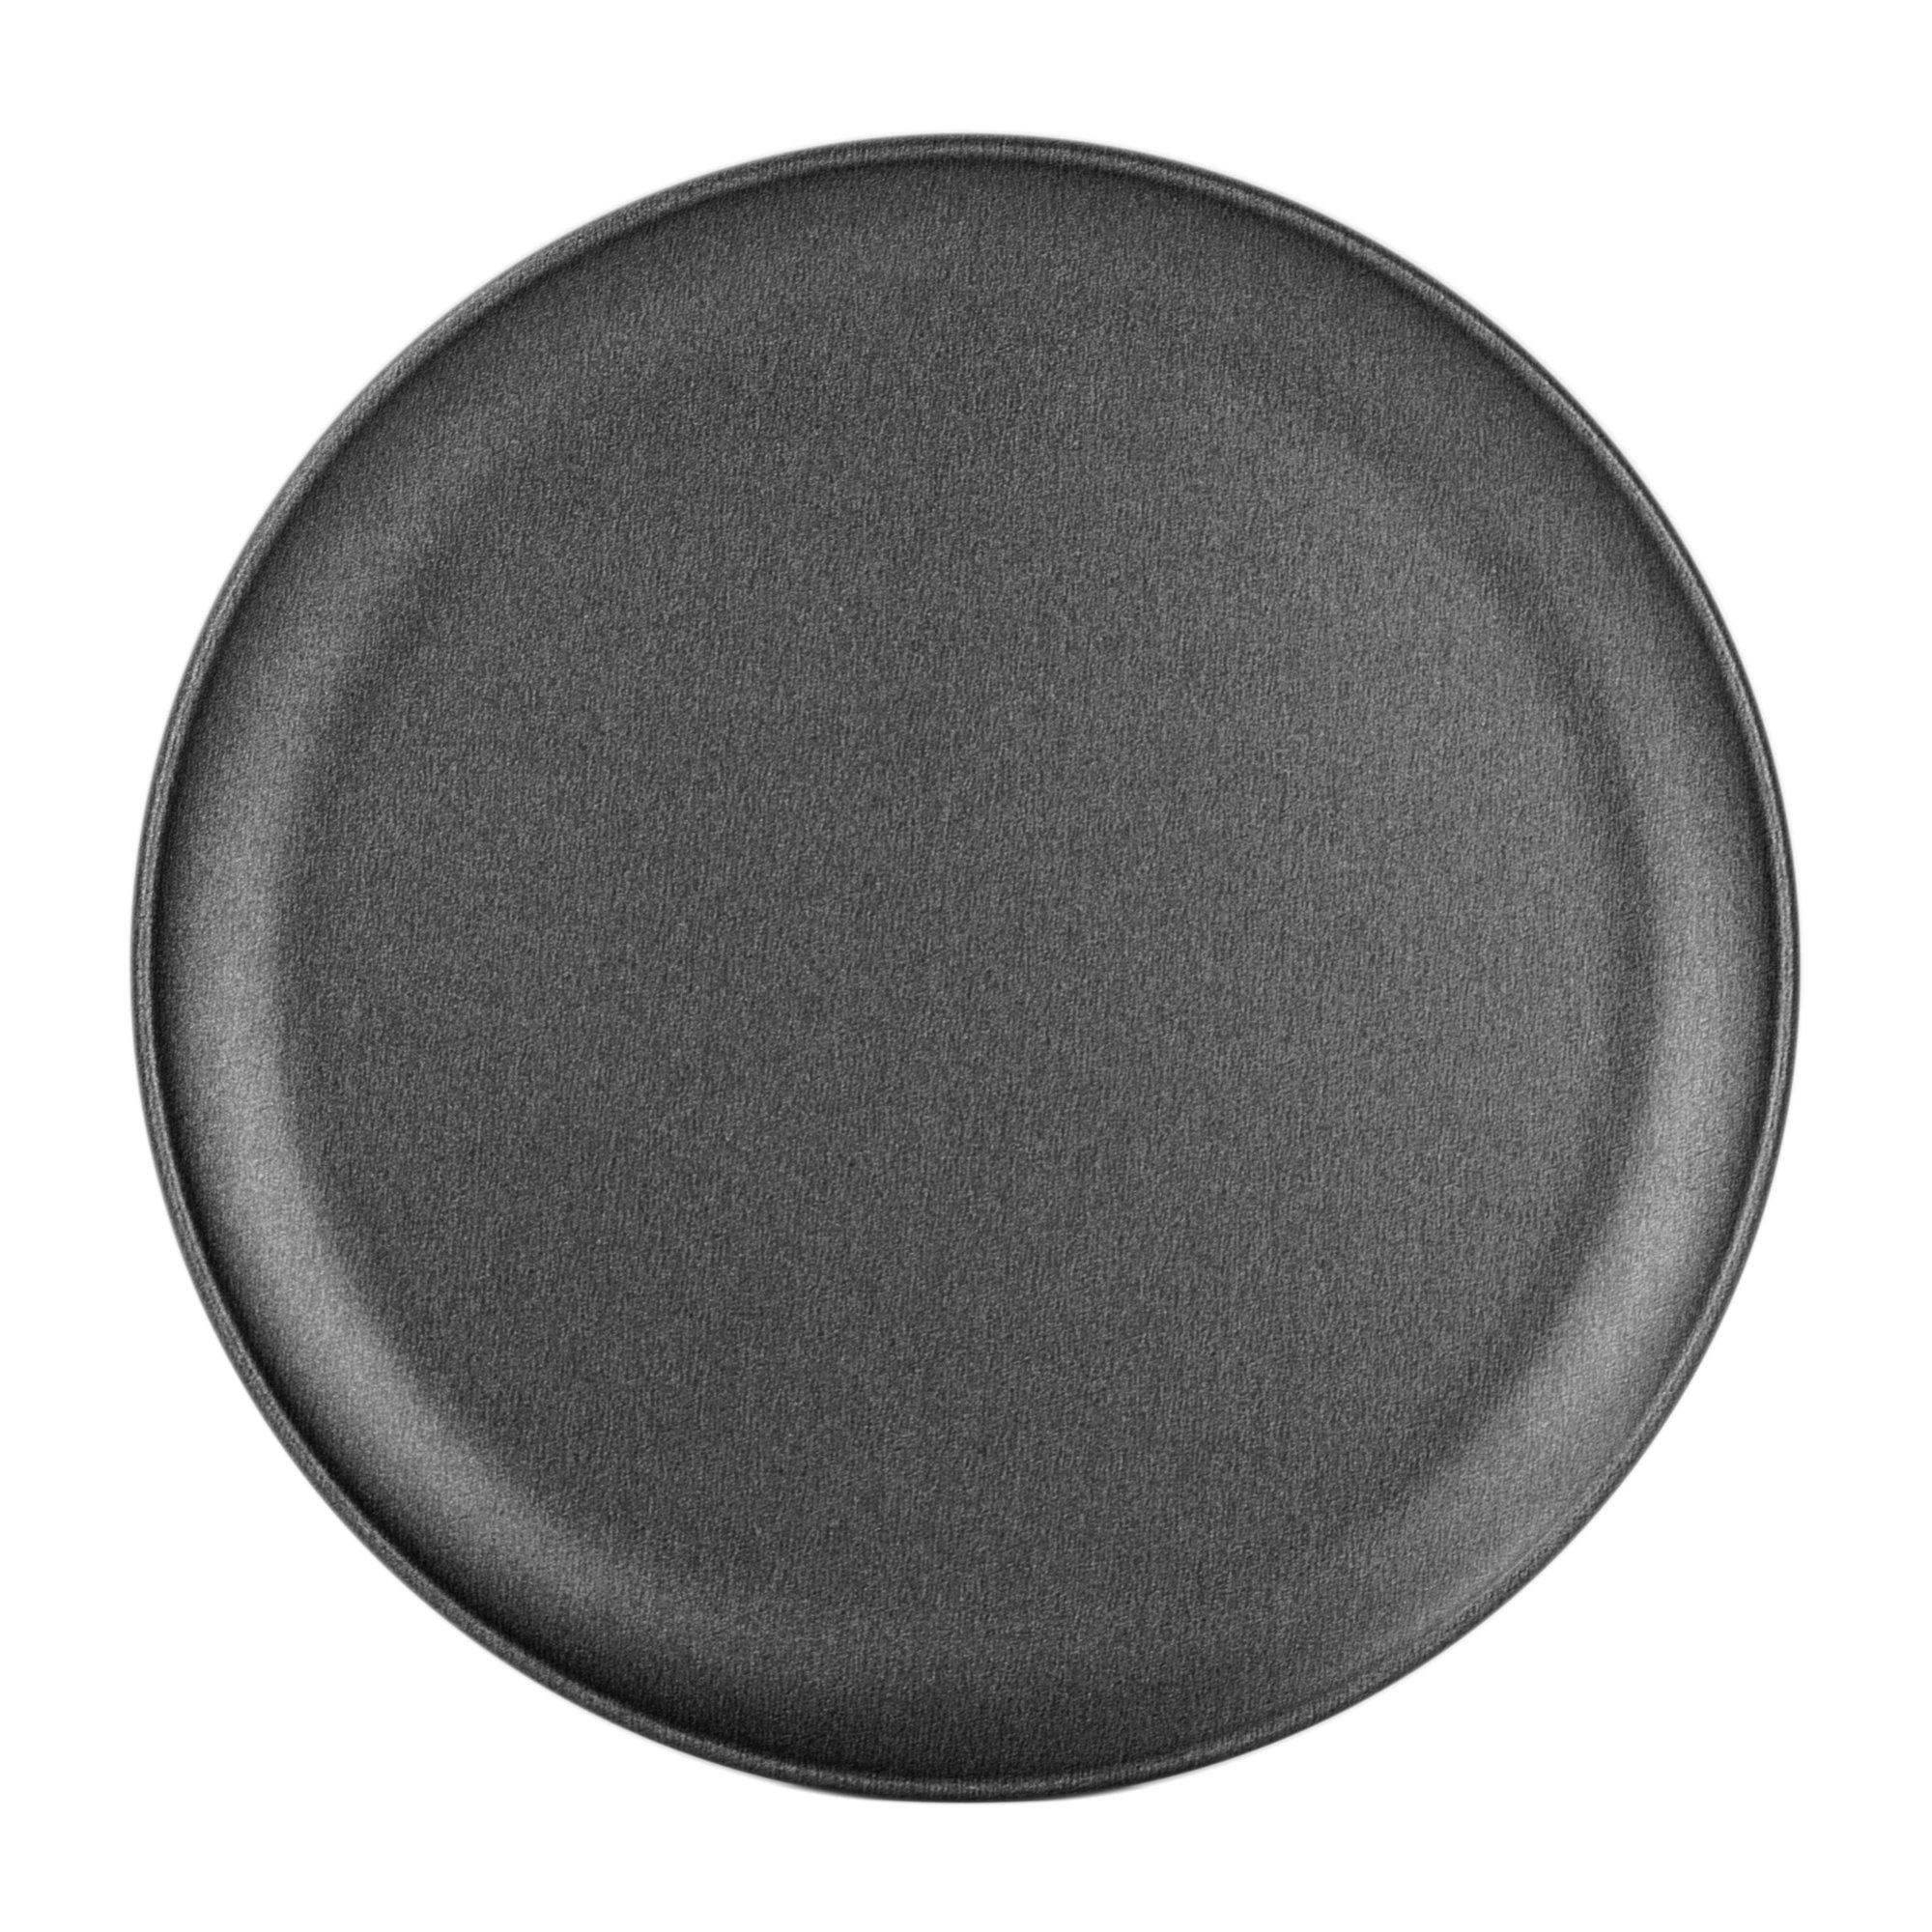 g & s metal products company pb45-mto nonstick pizza, 12, 1 pan, black